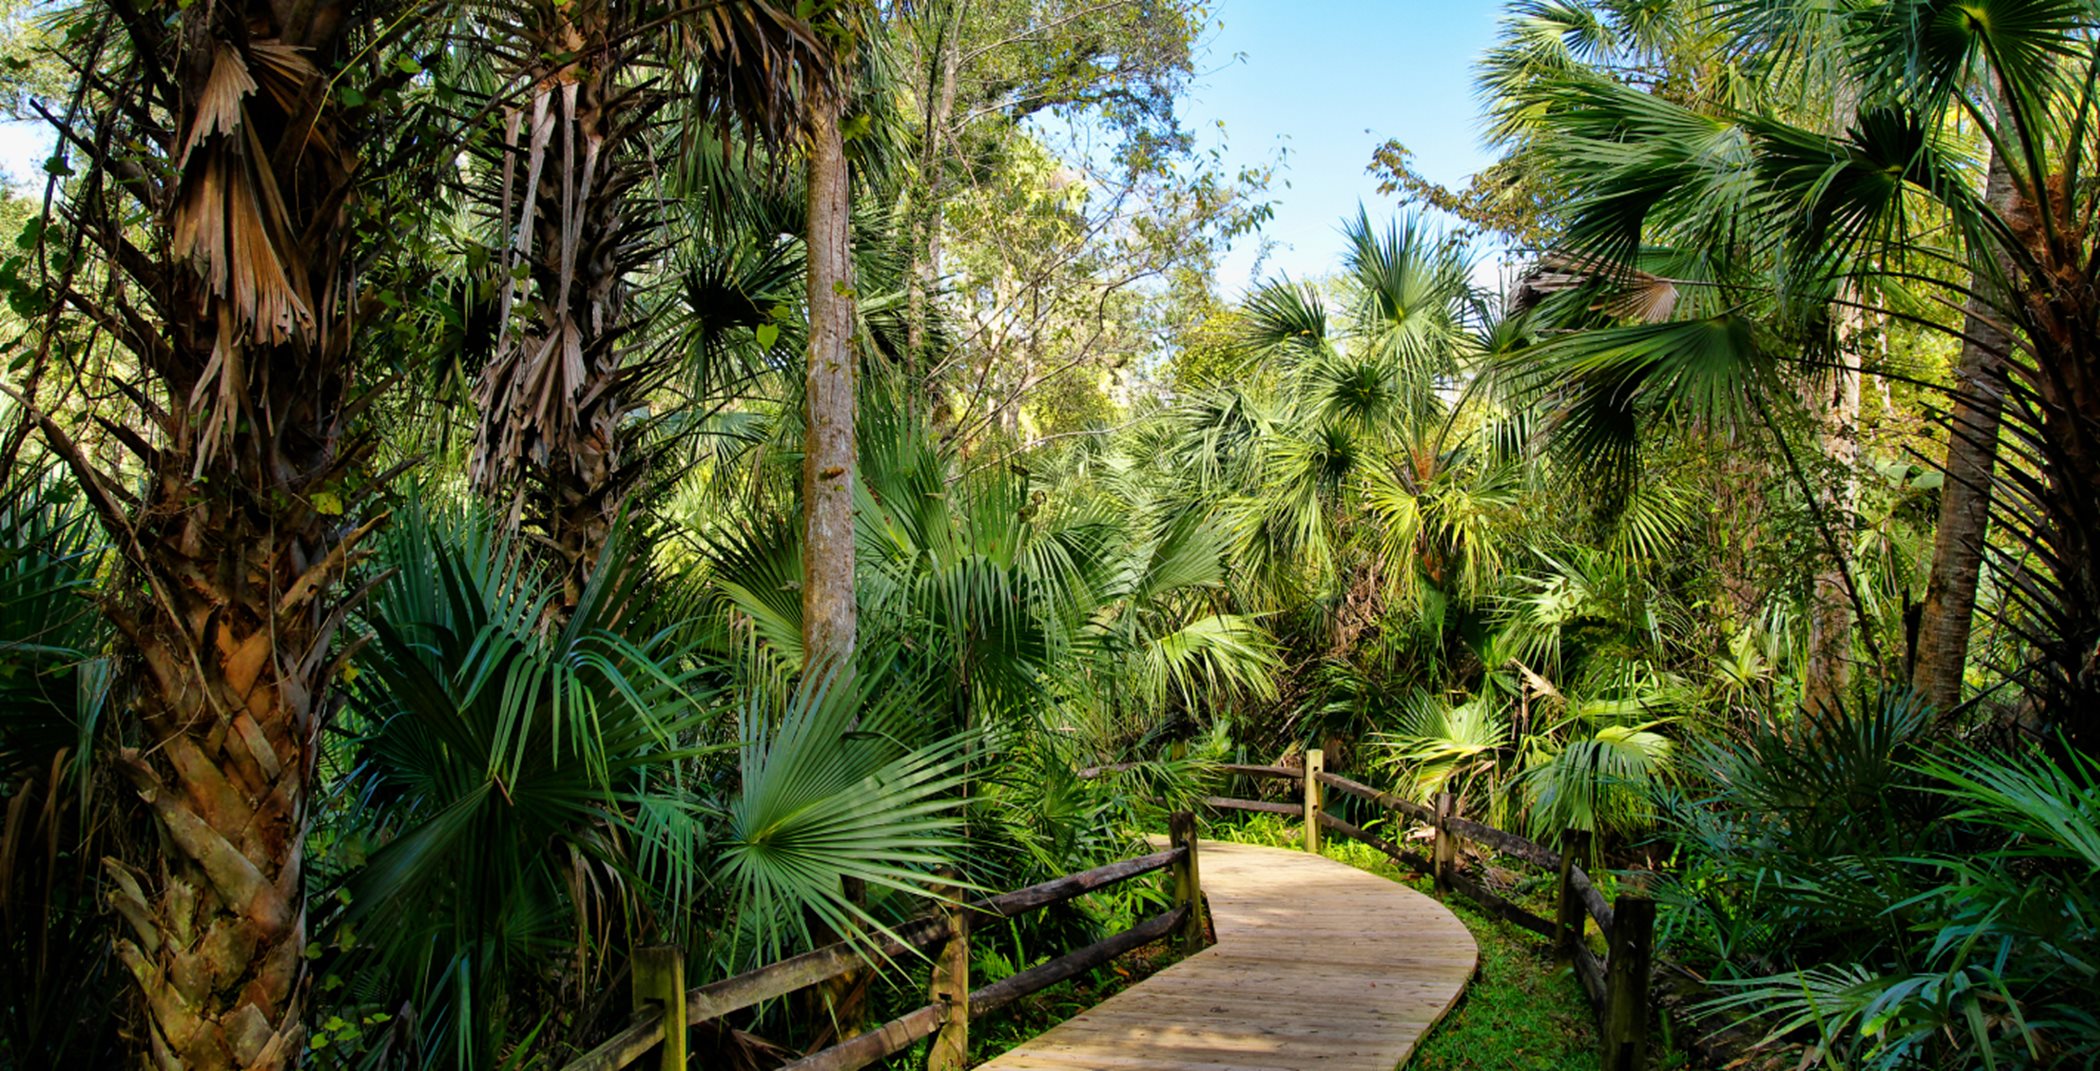 Walking trail surrounded by Palm trees